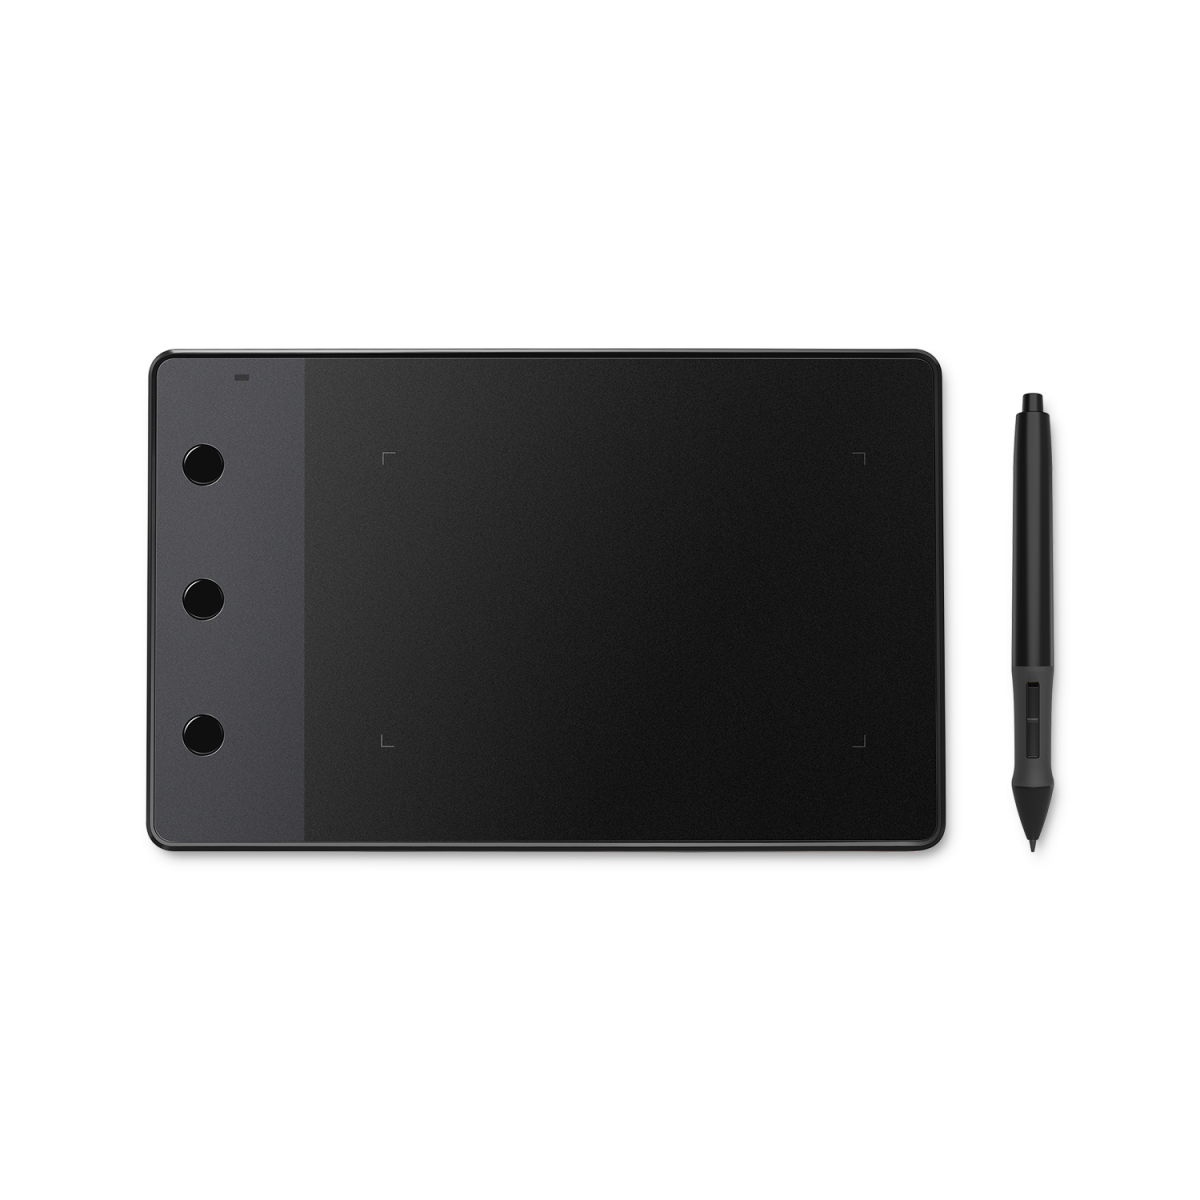 New Huion 420 4x2.23 USB Animation Digitizer Graphics Drawing Tablet